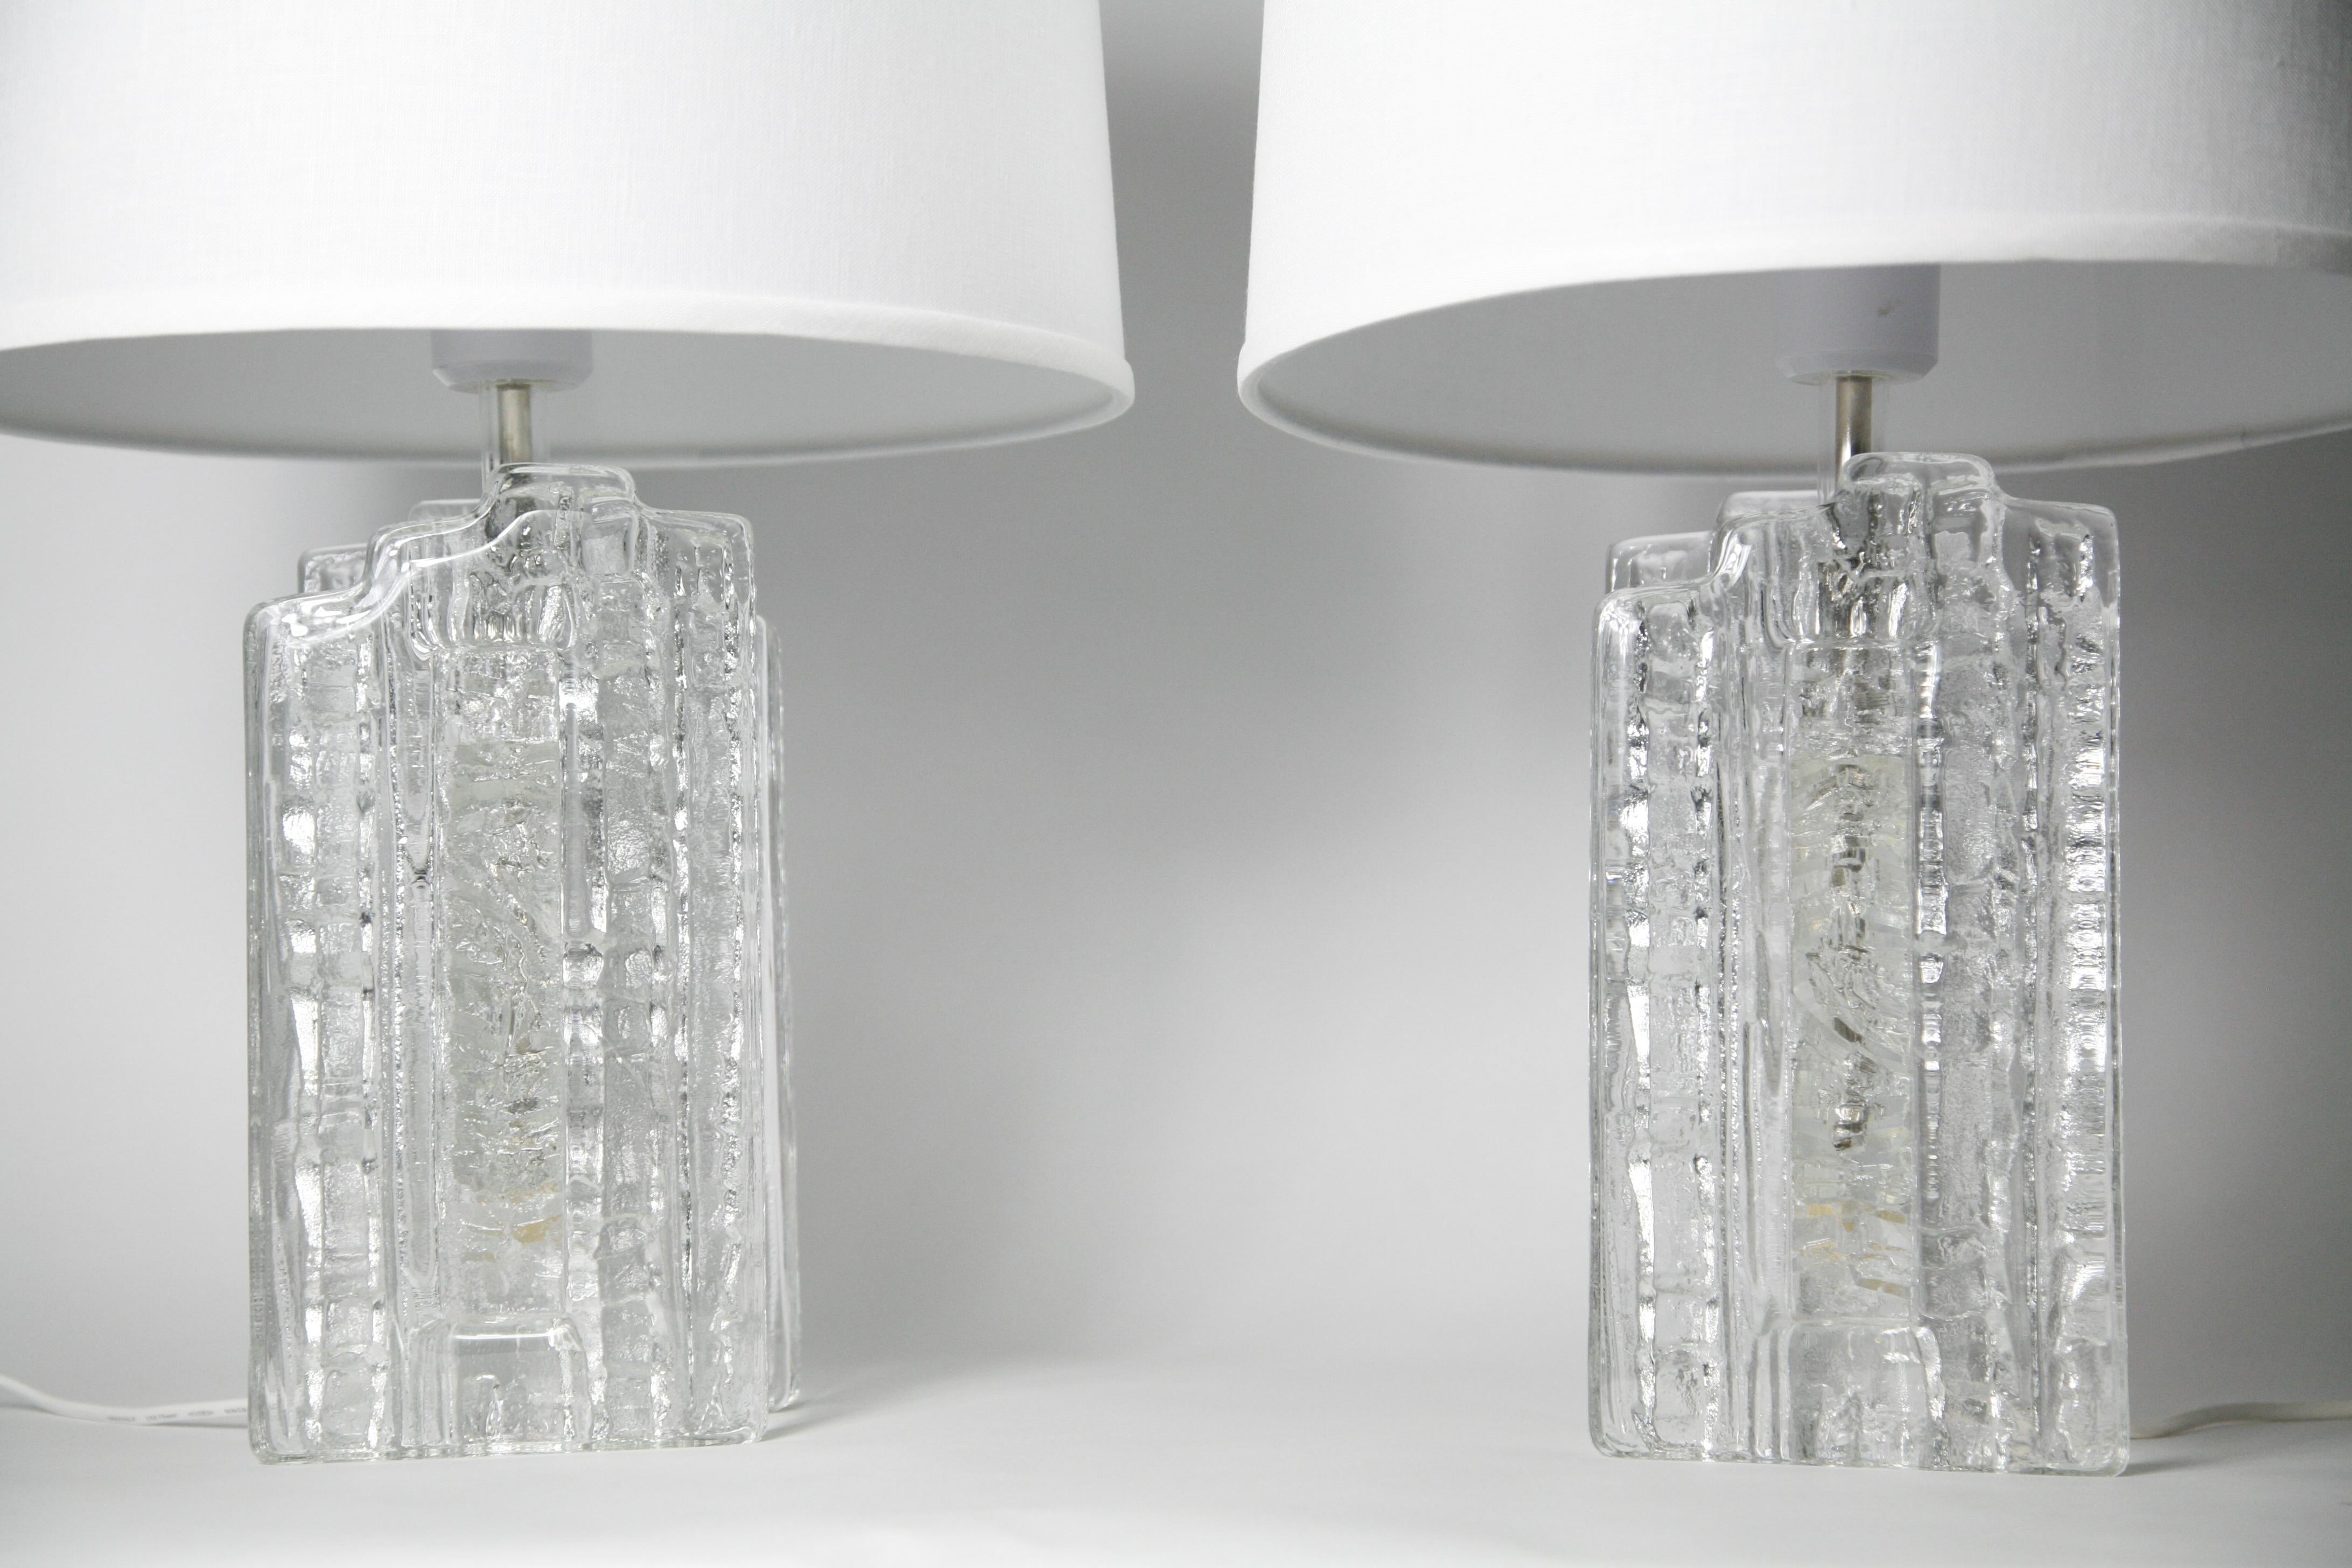 Rarely seen Pair of thick duo crystal block lamps that has pattern on the inside of the glass the outer surface is smooth except from the middle section that has a pattern that looks almost frosted, Sweden, 1970s. Comes rewired for the US.
Pukeberg,